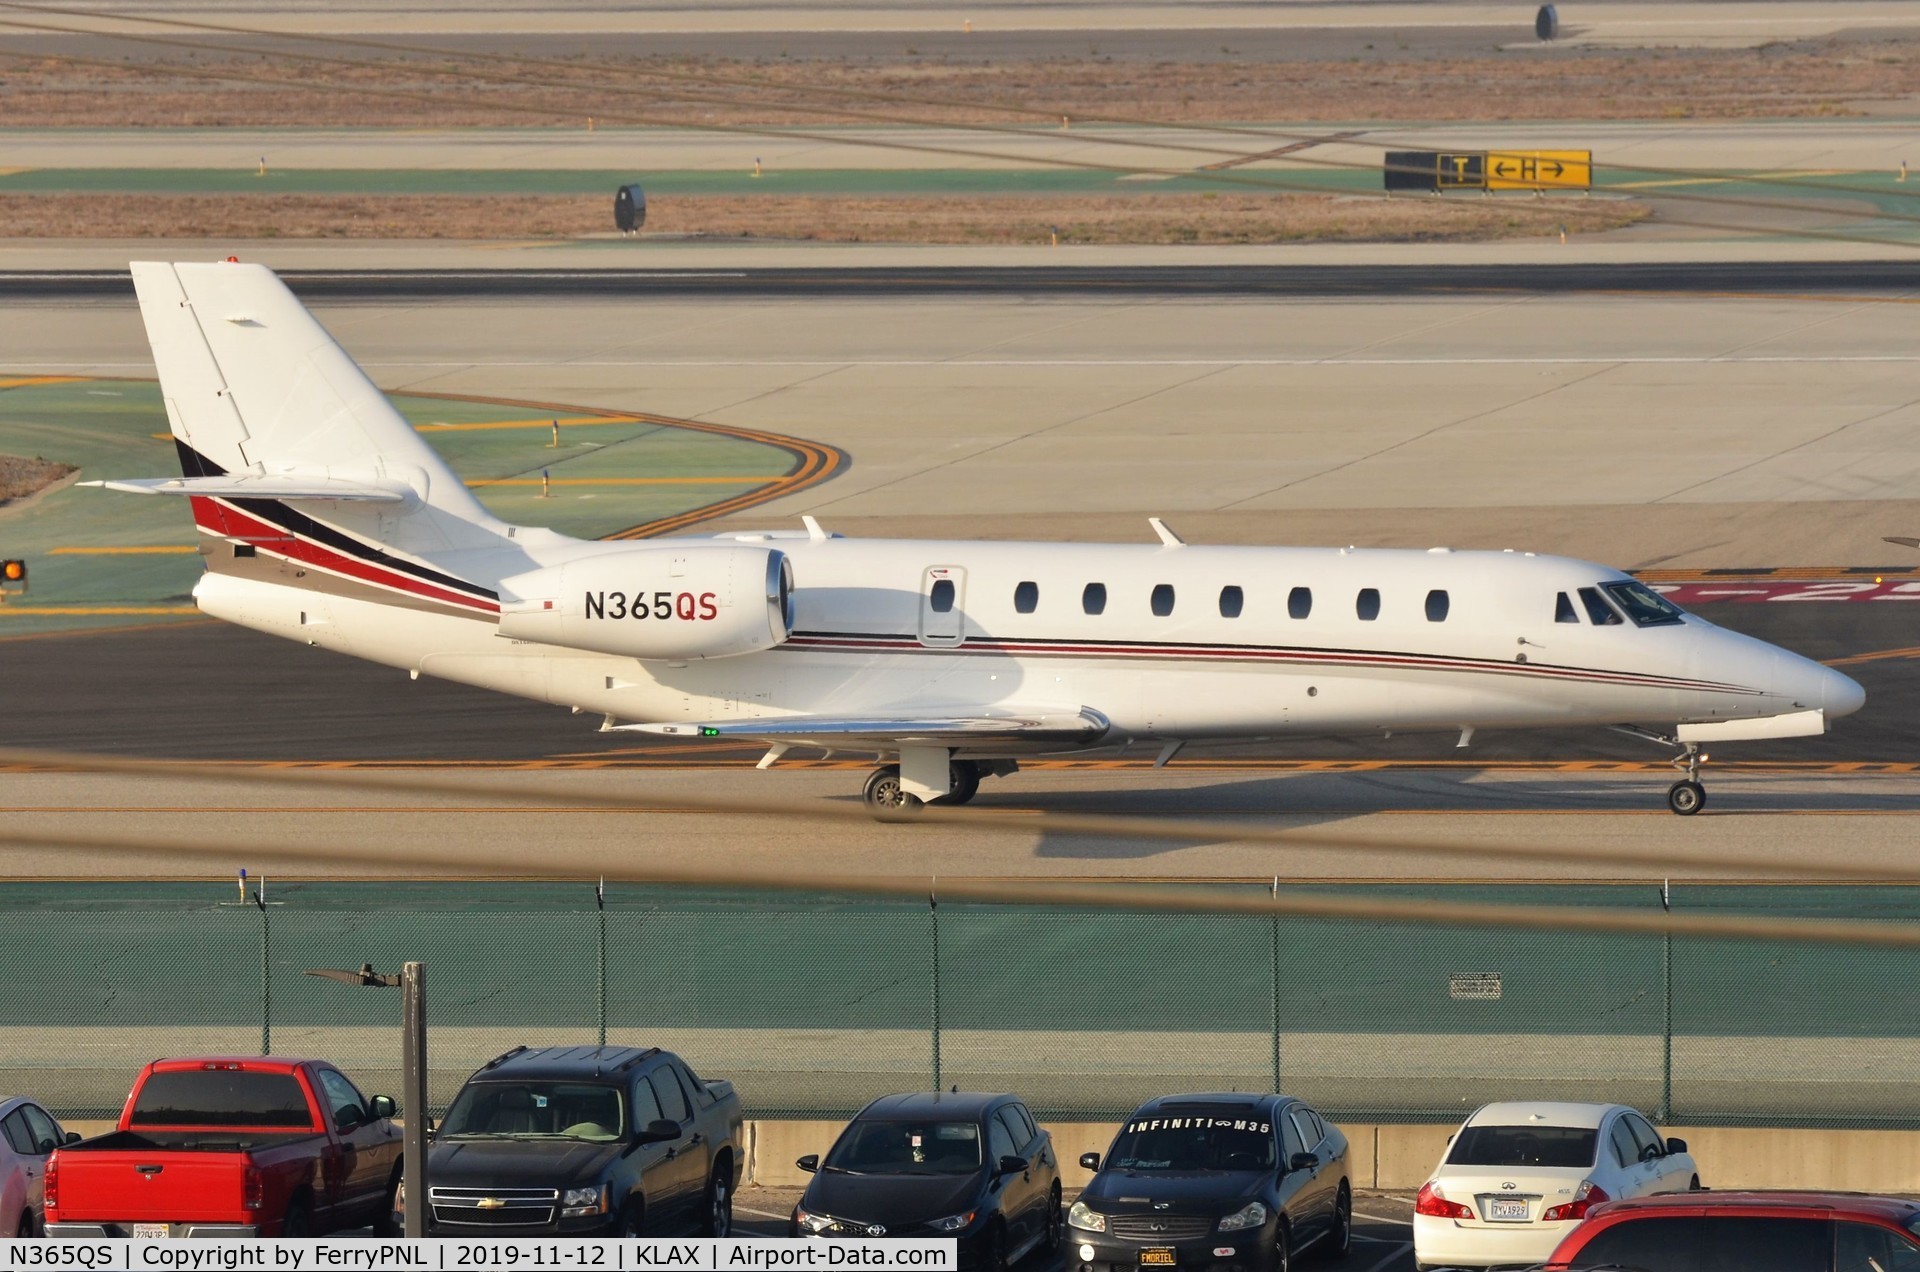 N365QS, 2005 Cessna 680 Citation Sovereign C/N 680-0057, Netjets Ce680 taxying to the FBO